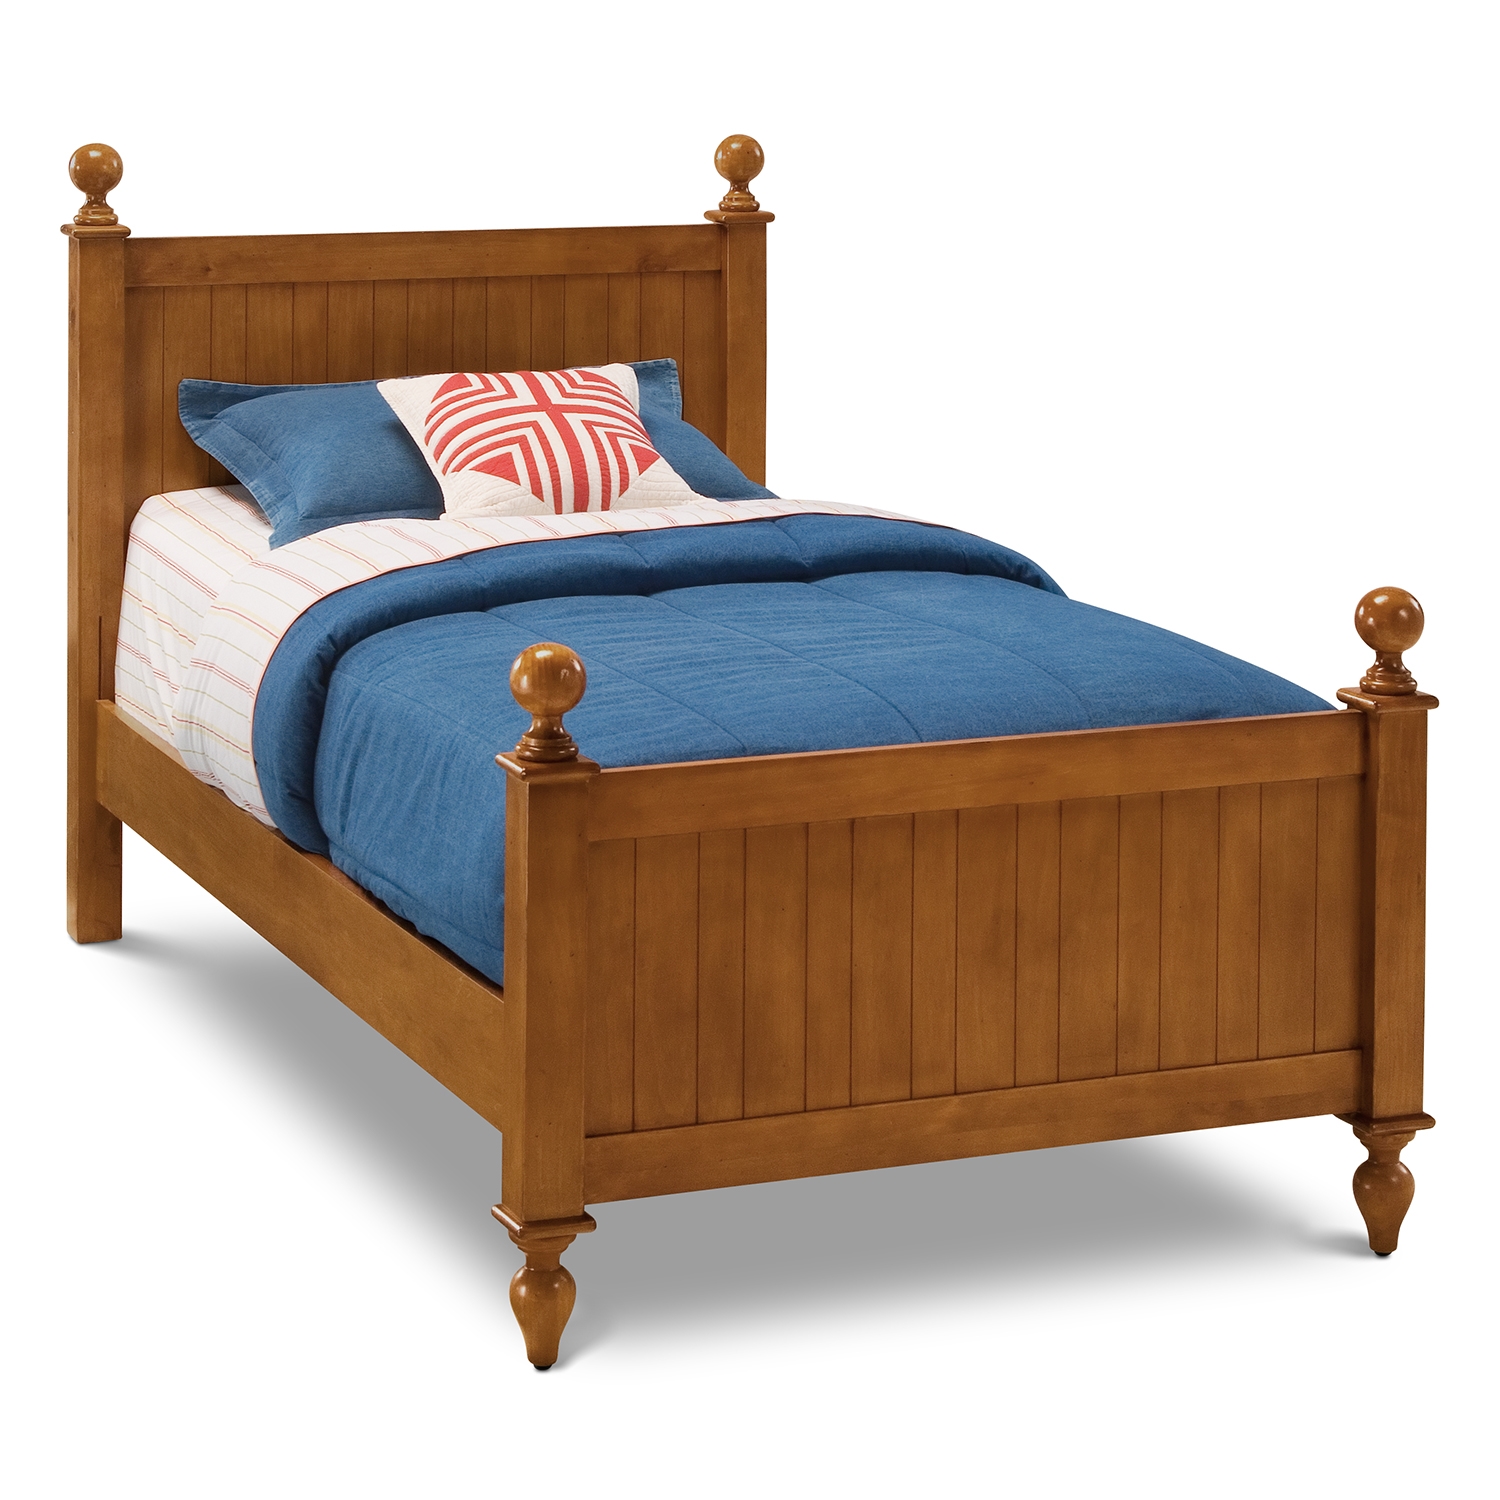 twin bed toddler bedding photo - 5